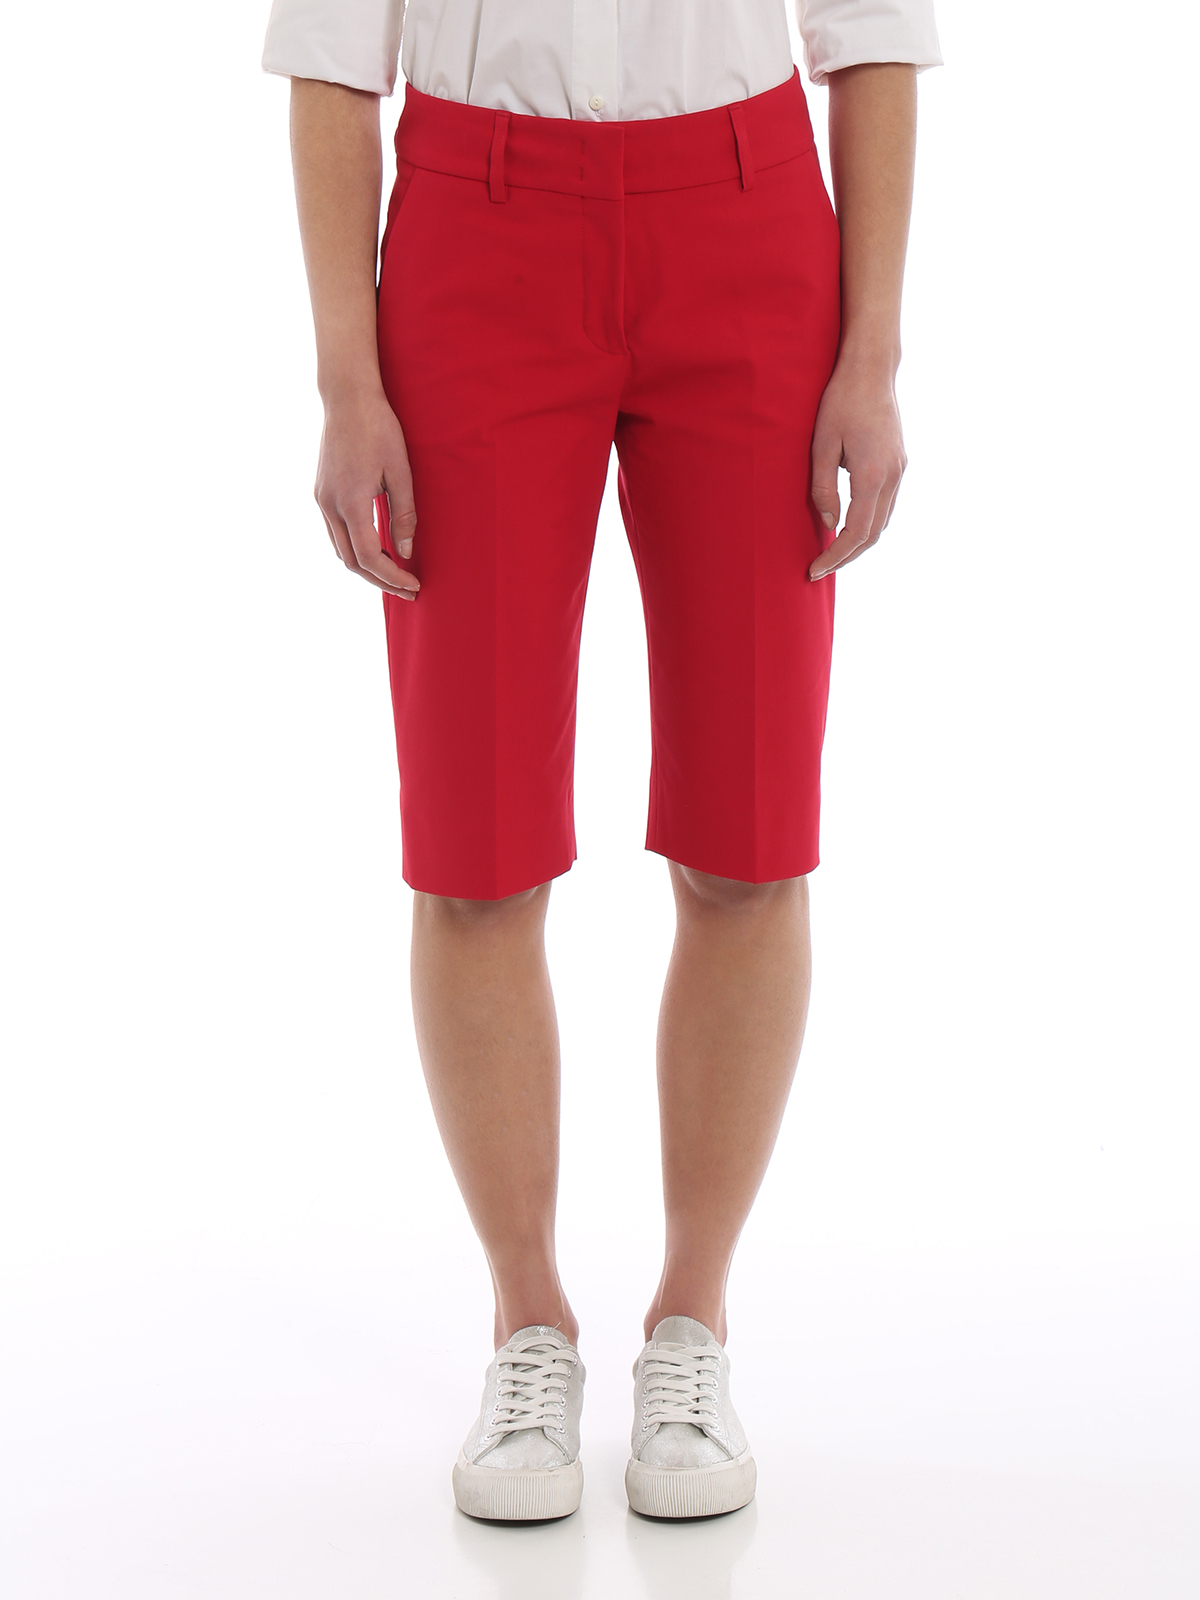 Trousers Shorts Piazza Sempione - Alissa red cotton short pants ...